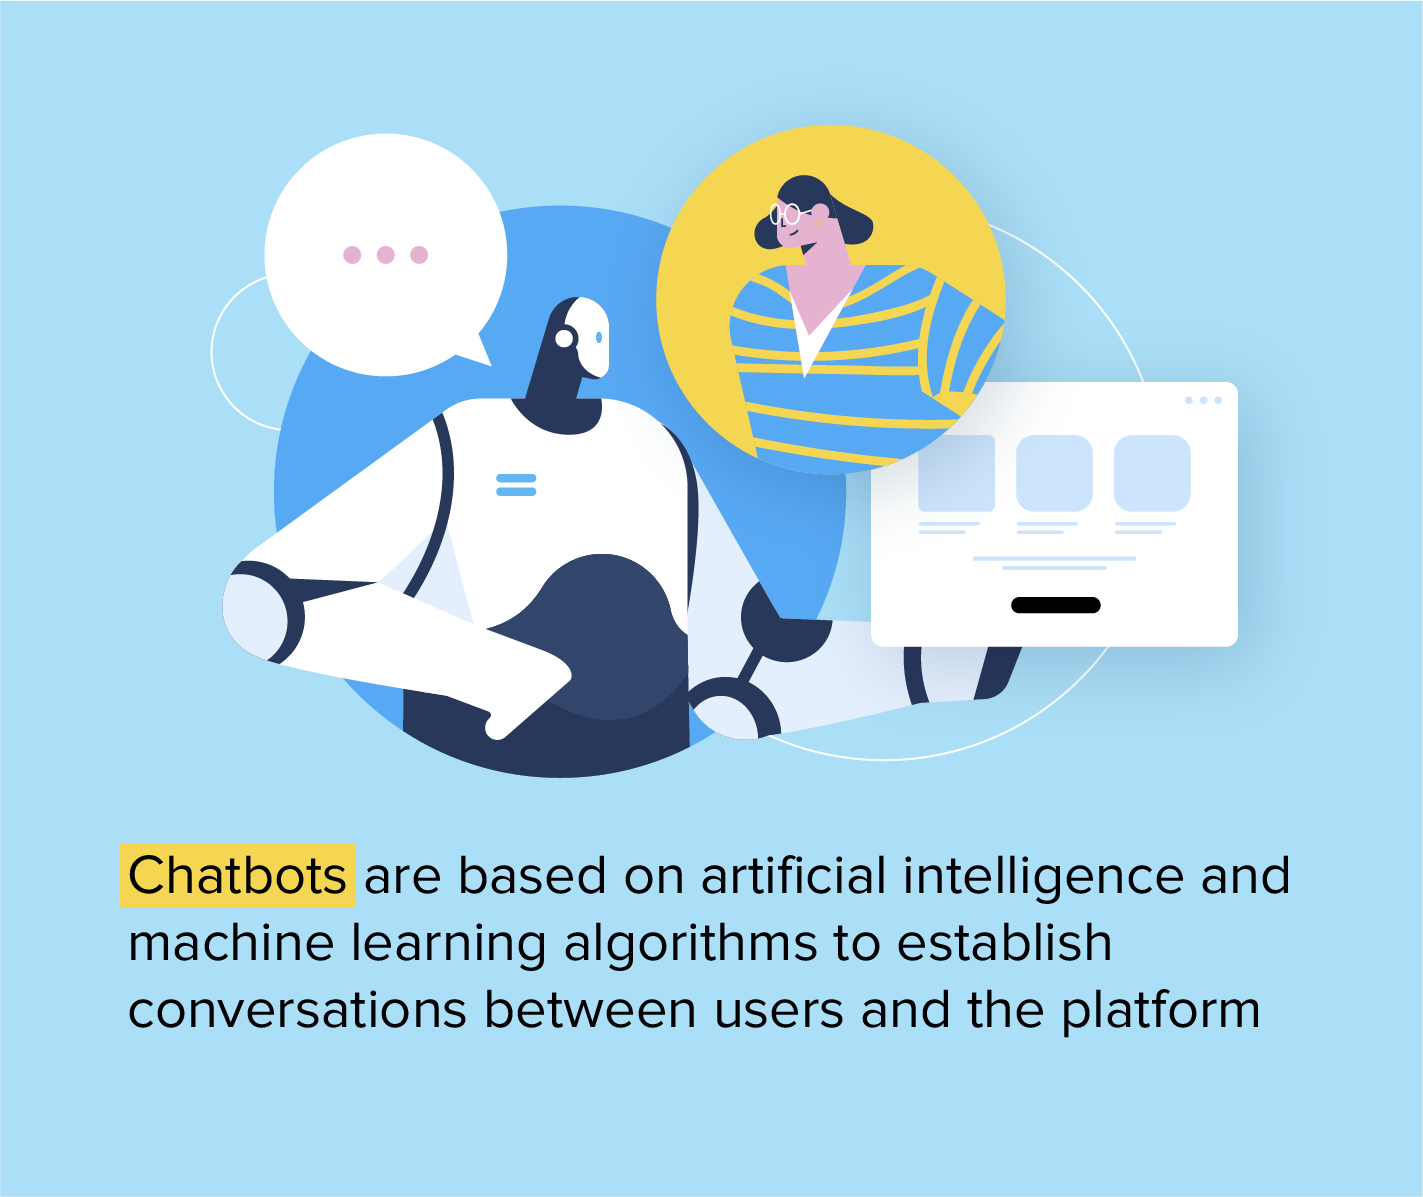 What is a chatbot?